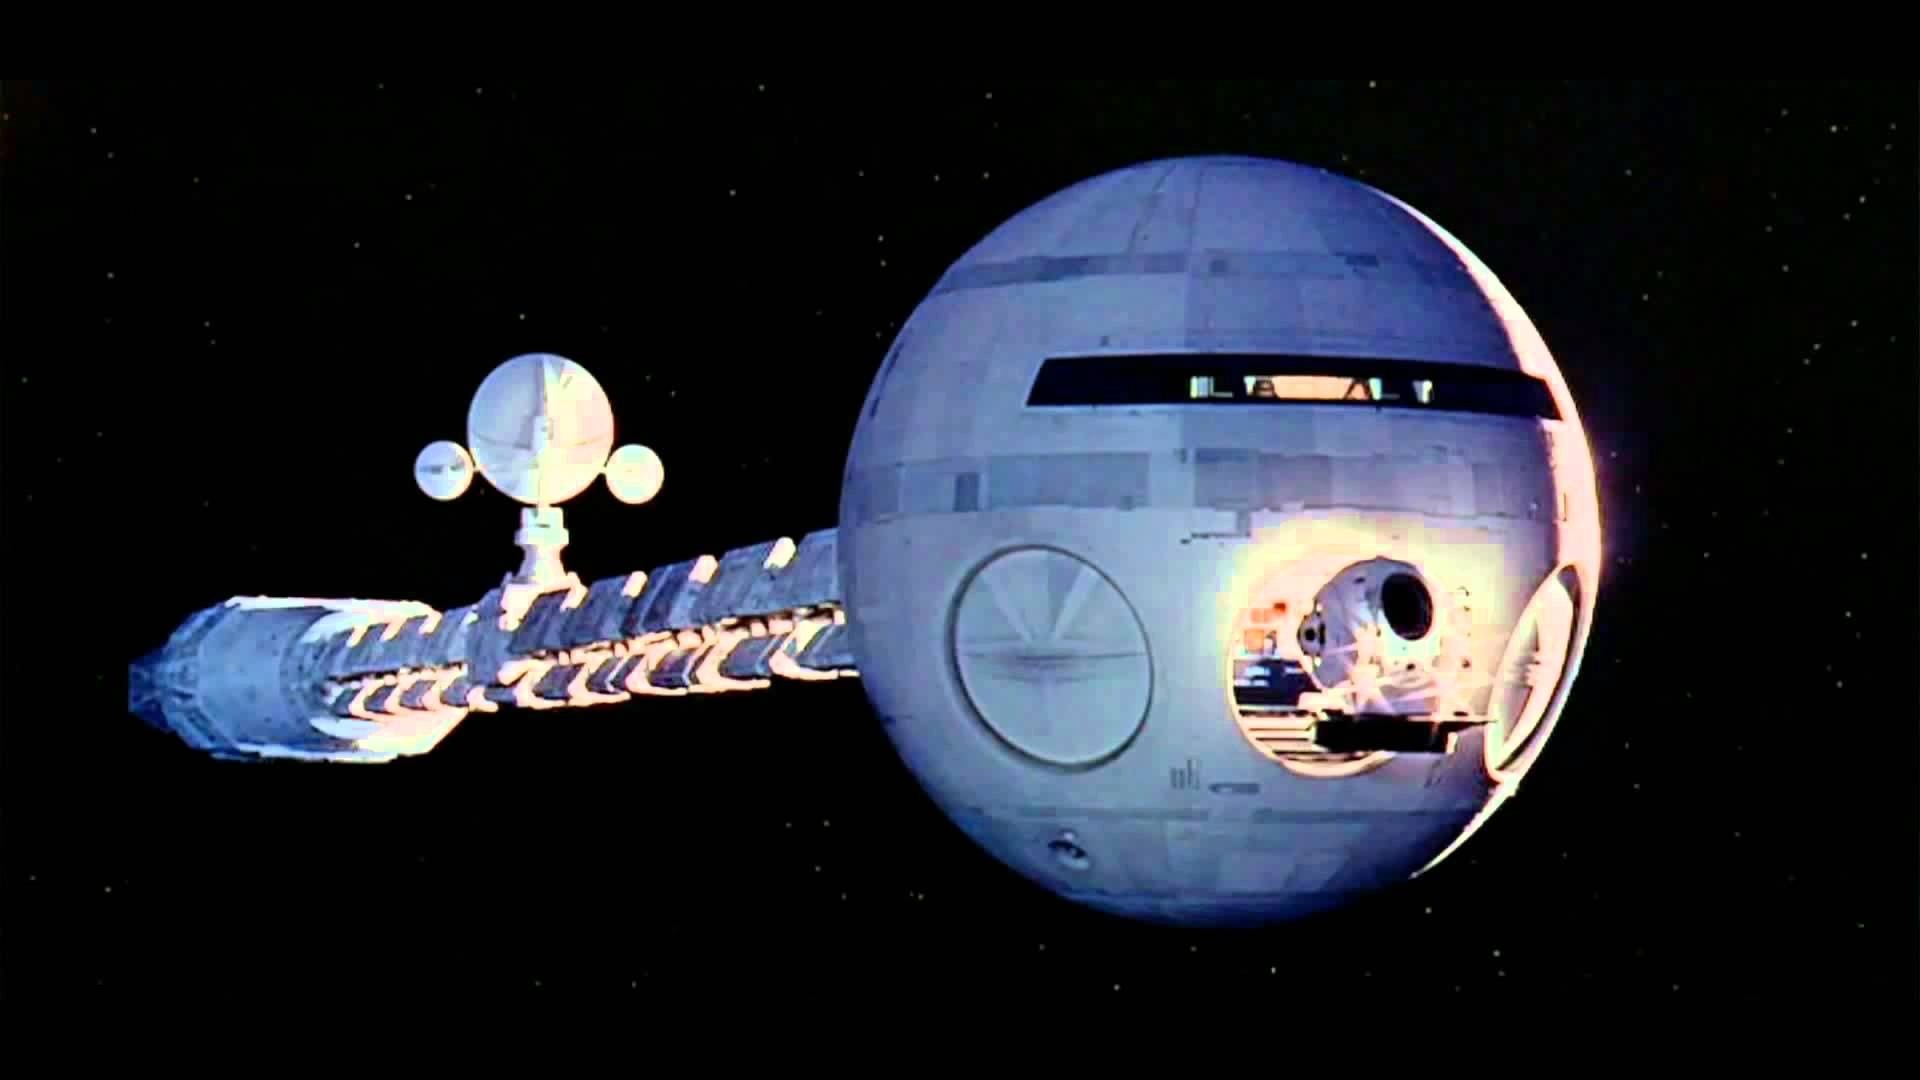 The Discovery On Its Way To Jupiter In - 2001 A Space Odyssey Ship - HD Wallpaper 